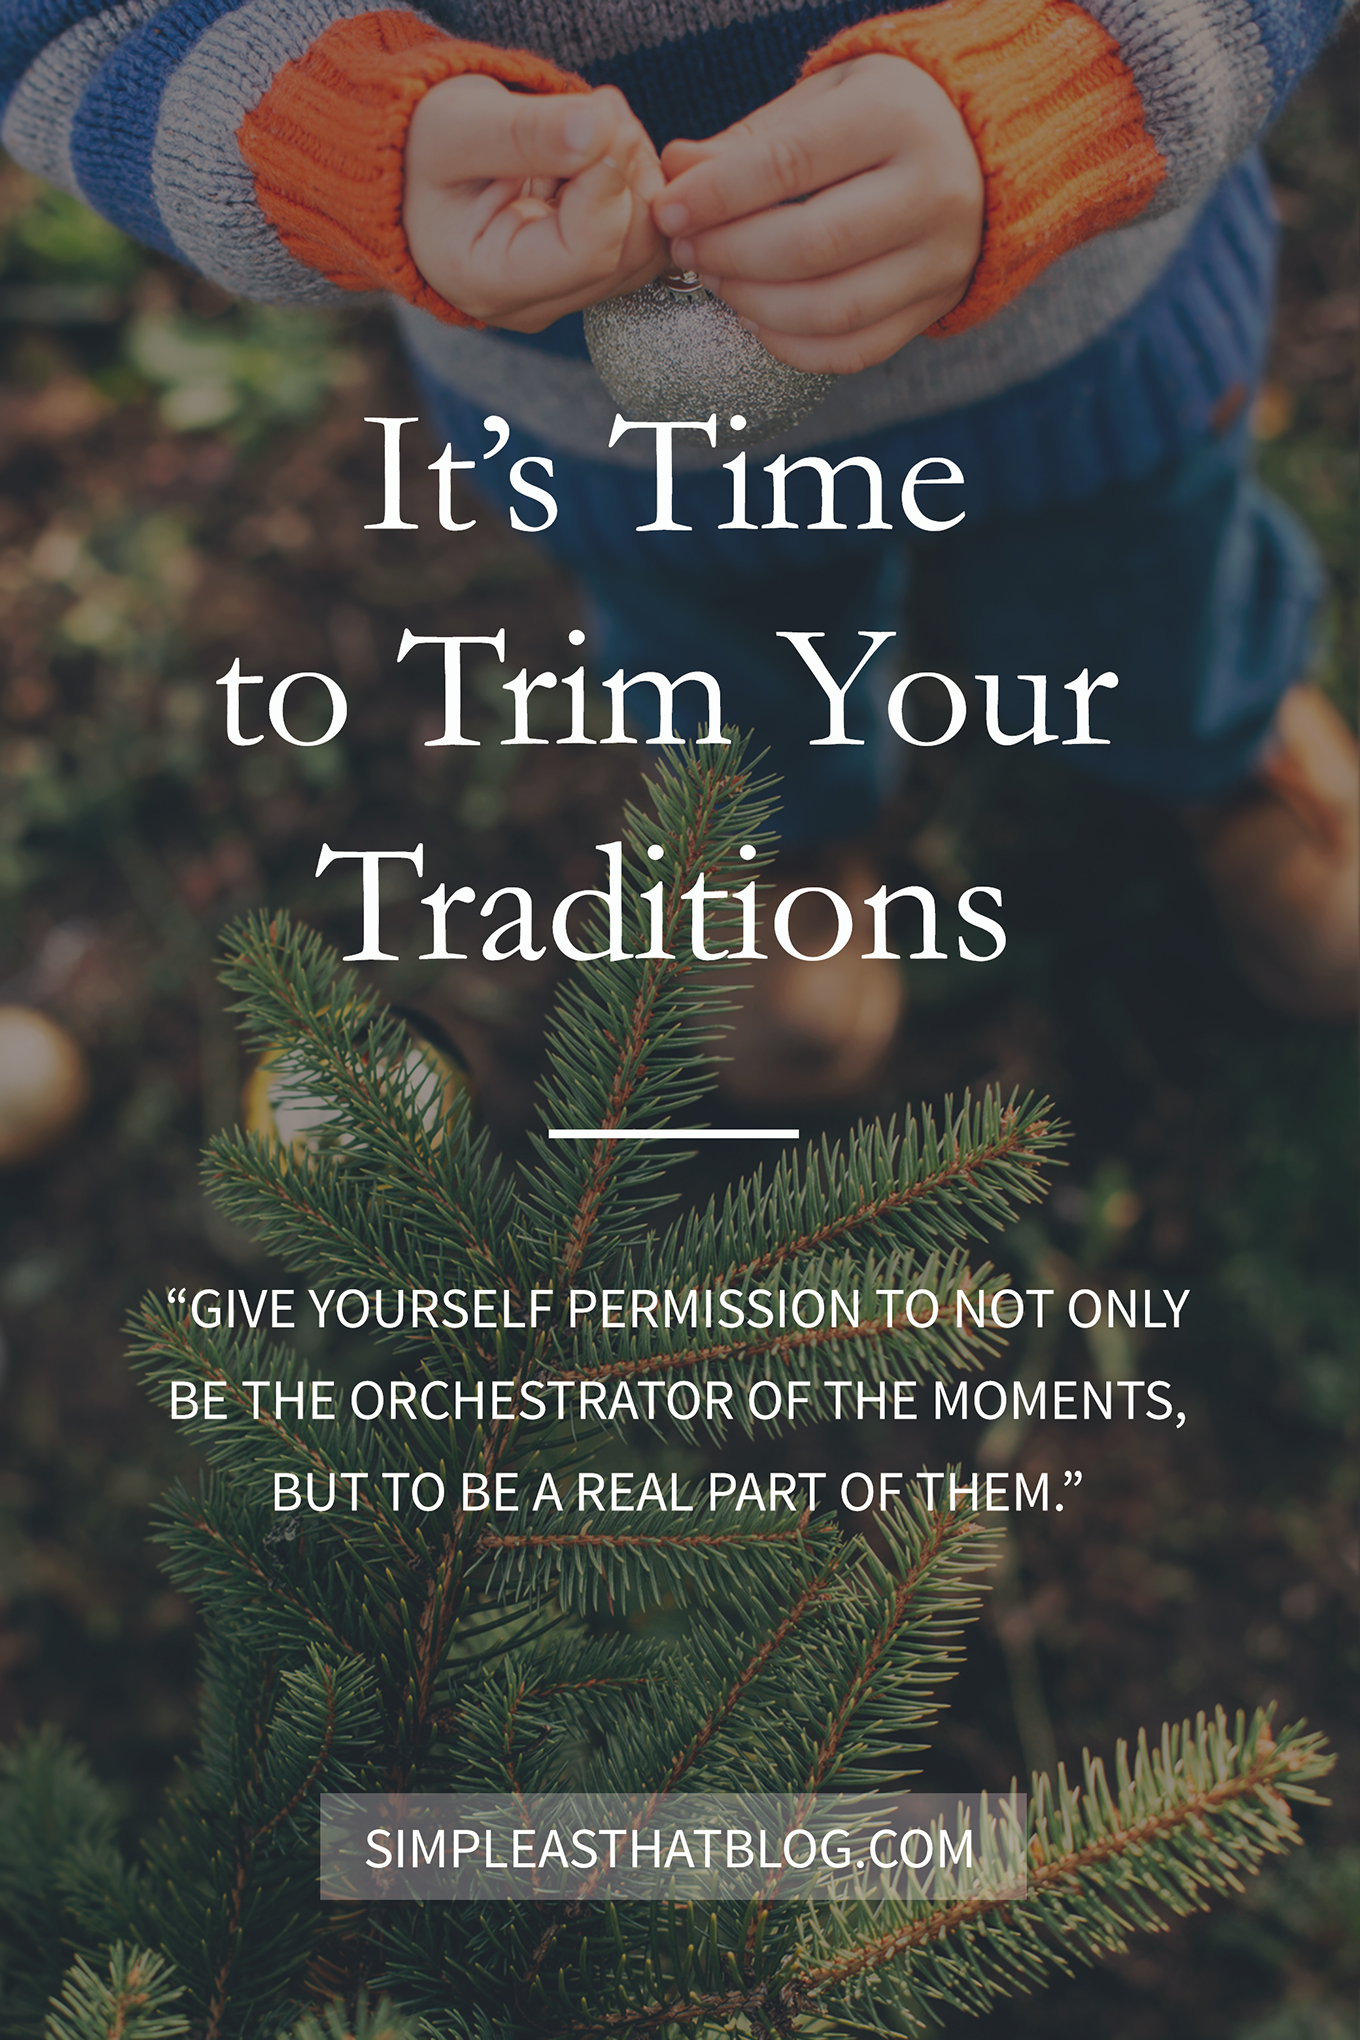 It's time to trim your traditions and give yourself permission to not only be the orchestrator of the moments, but to be a real part of them.